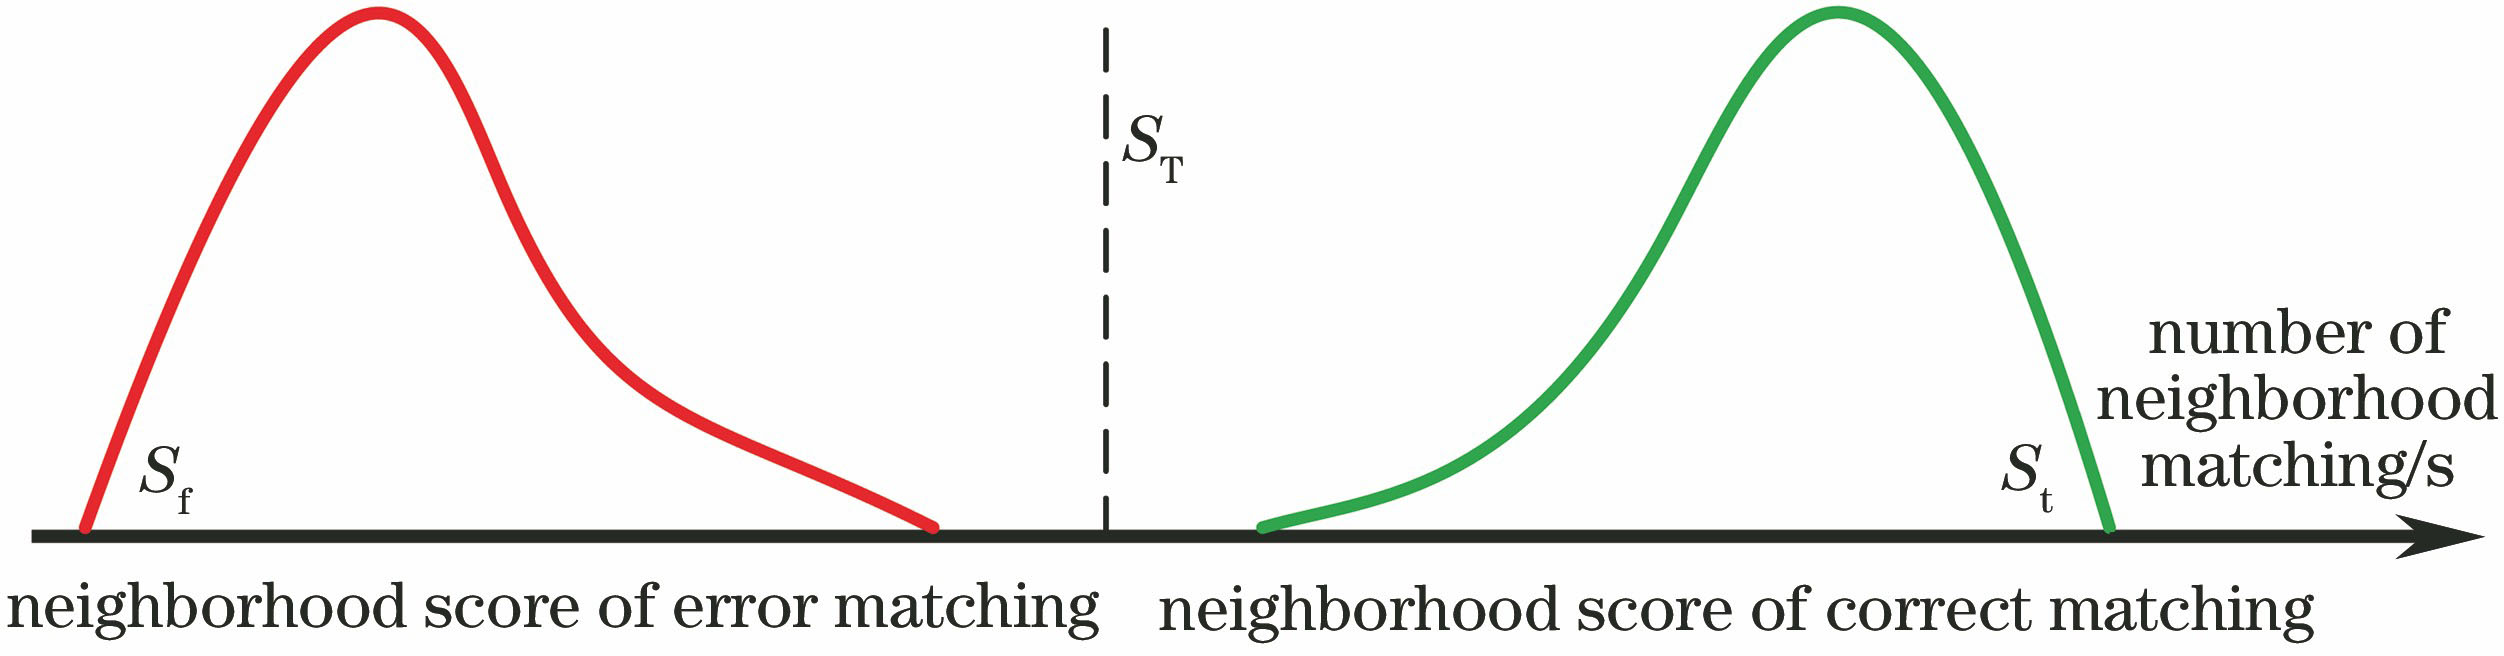 Correct matching and error matching feature for neighborhood score distributions